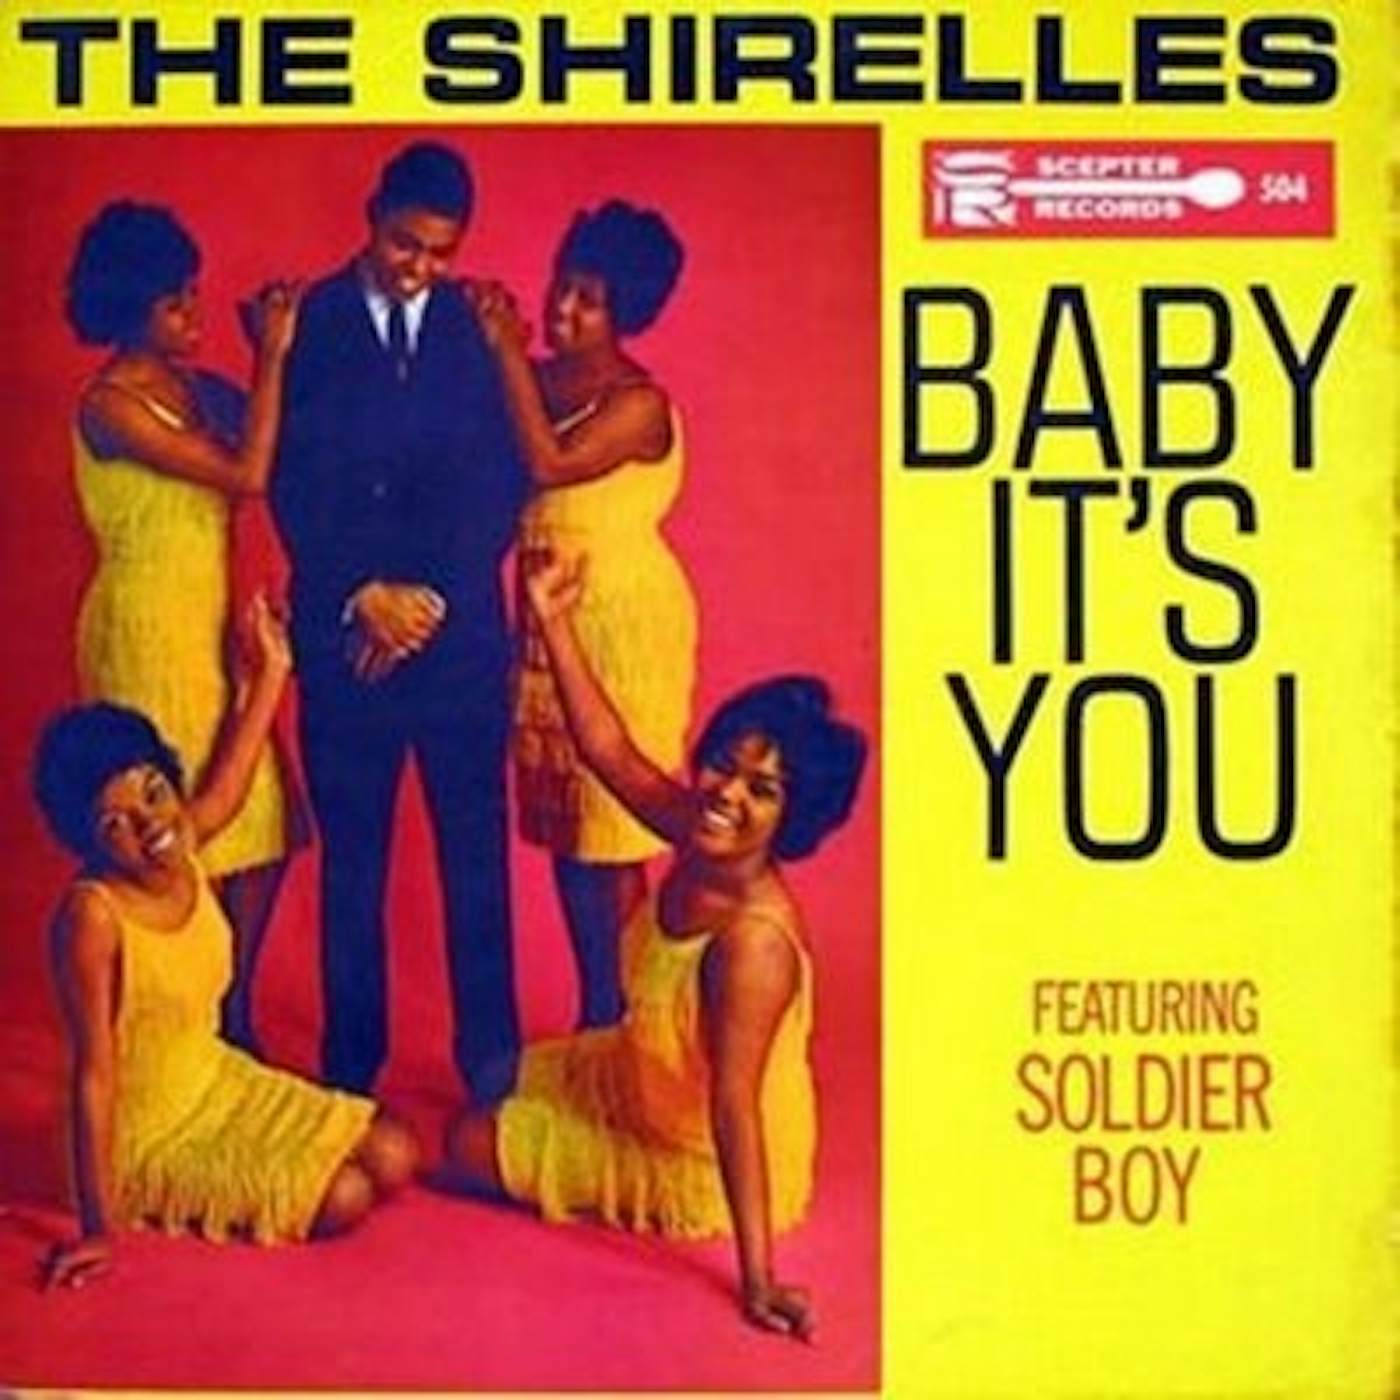 The Shirelles BABY IT'S YOU Vinyl Record - Spain Release